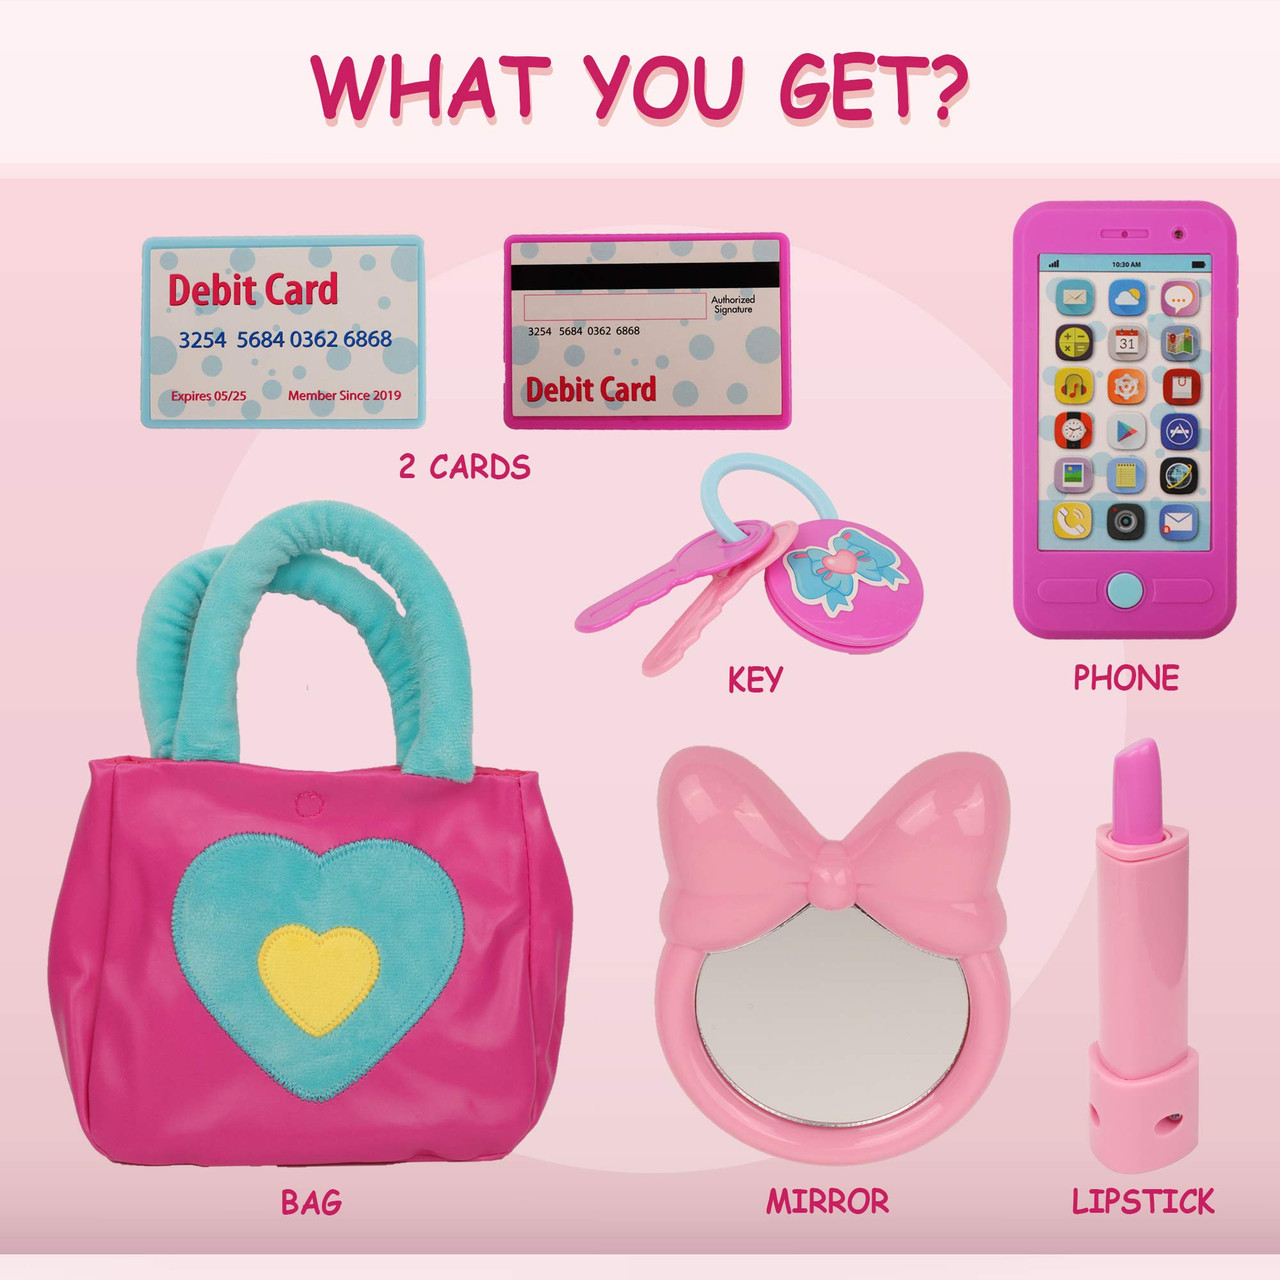 Star Princess Play Purse for Little Girls and Toddlers - Girls Toys Pretend Play Accessories: Toy Phone, Wallet, Credit Cards, Keys, Pretend Makeup